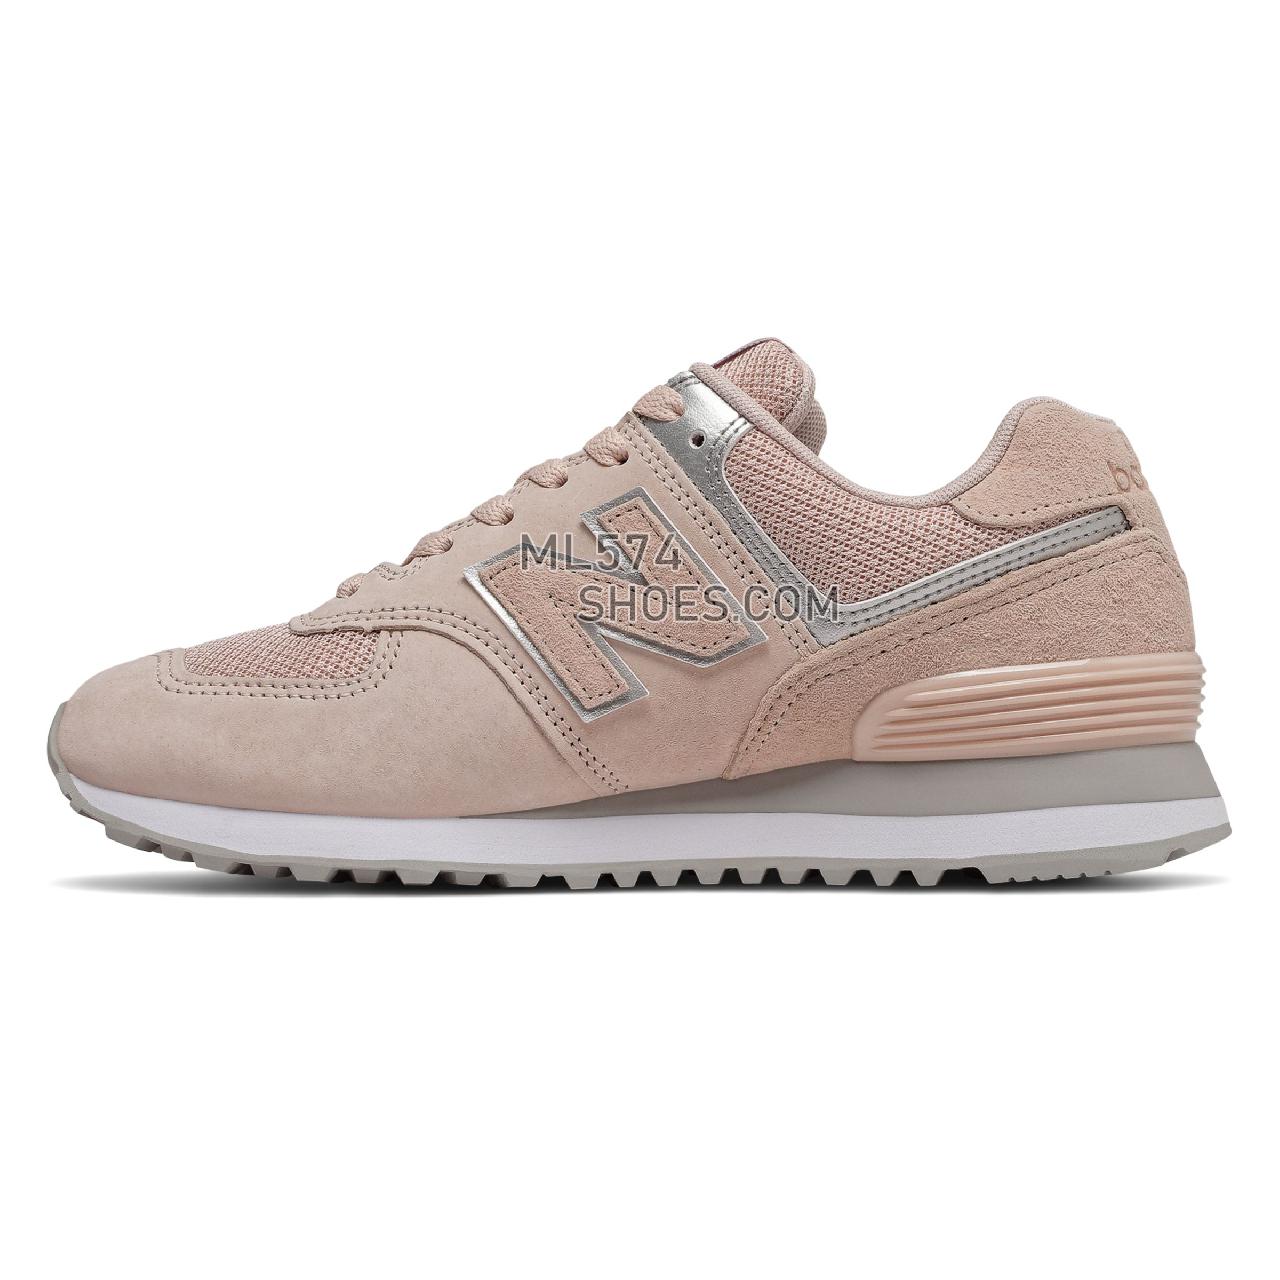 New Balance 574 - Women's Classic Sneakers - Smoked Salt with Silver - WL574EQ